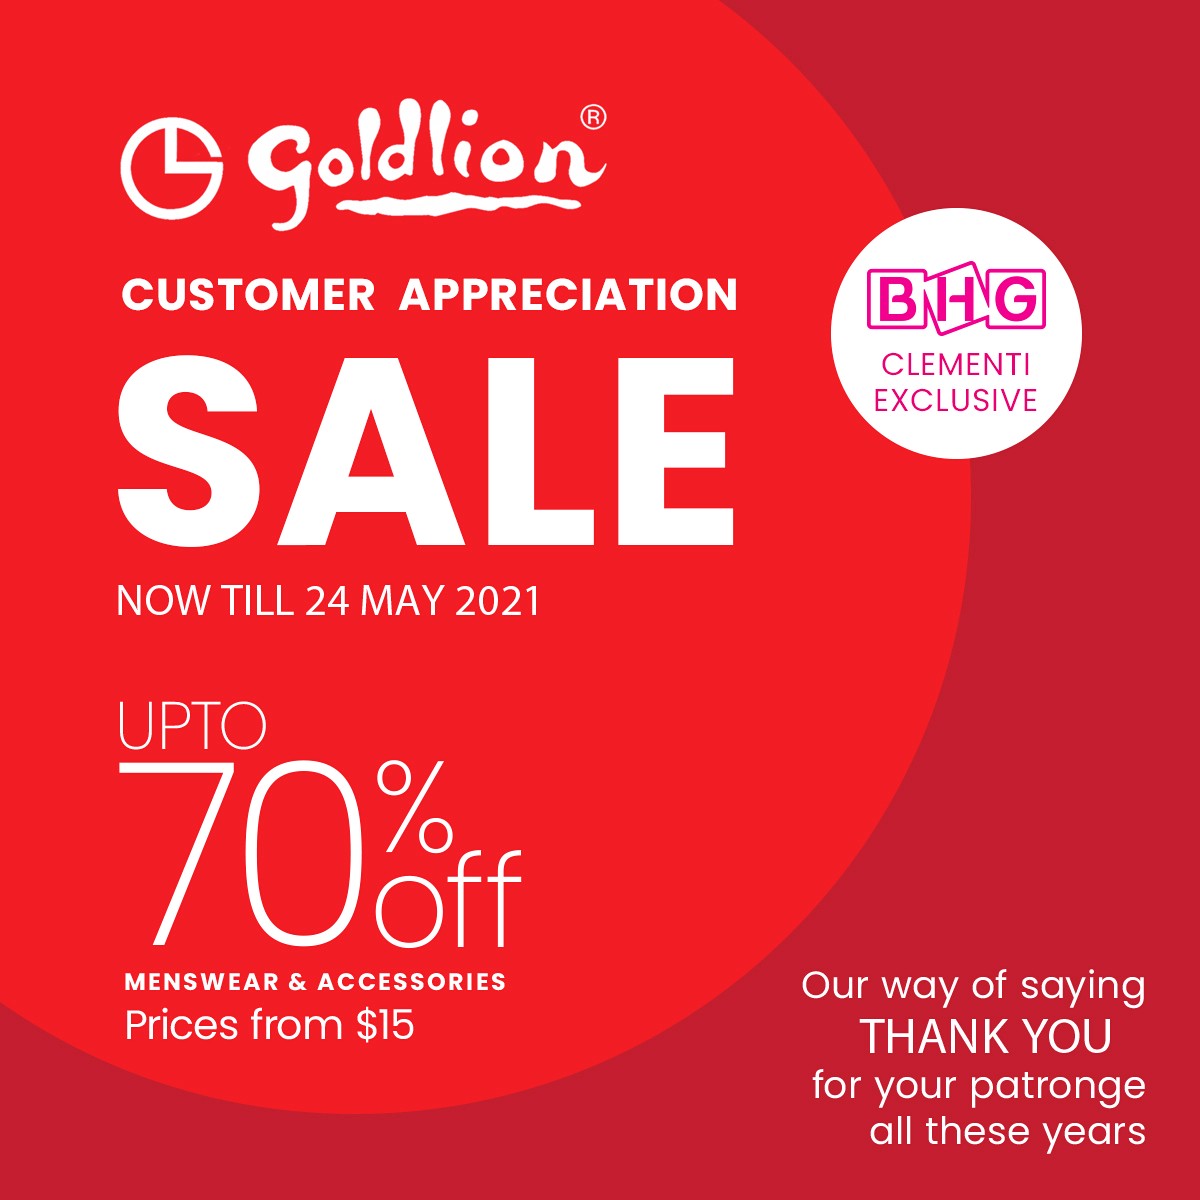 Goldlion-Customer-Appreaciation-Sale-2021-Singapore-Clearance-Warehouse-Discounts-Shopping 8-24 May 2021: Goldlion Customer Appreciation Sale! Up to 70% OFF at BHG The Clementi Mall